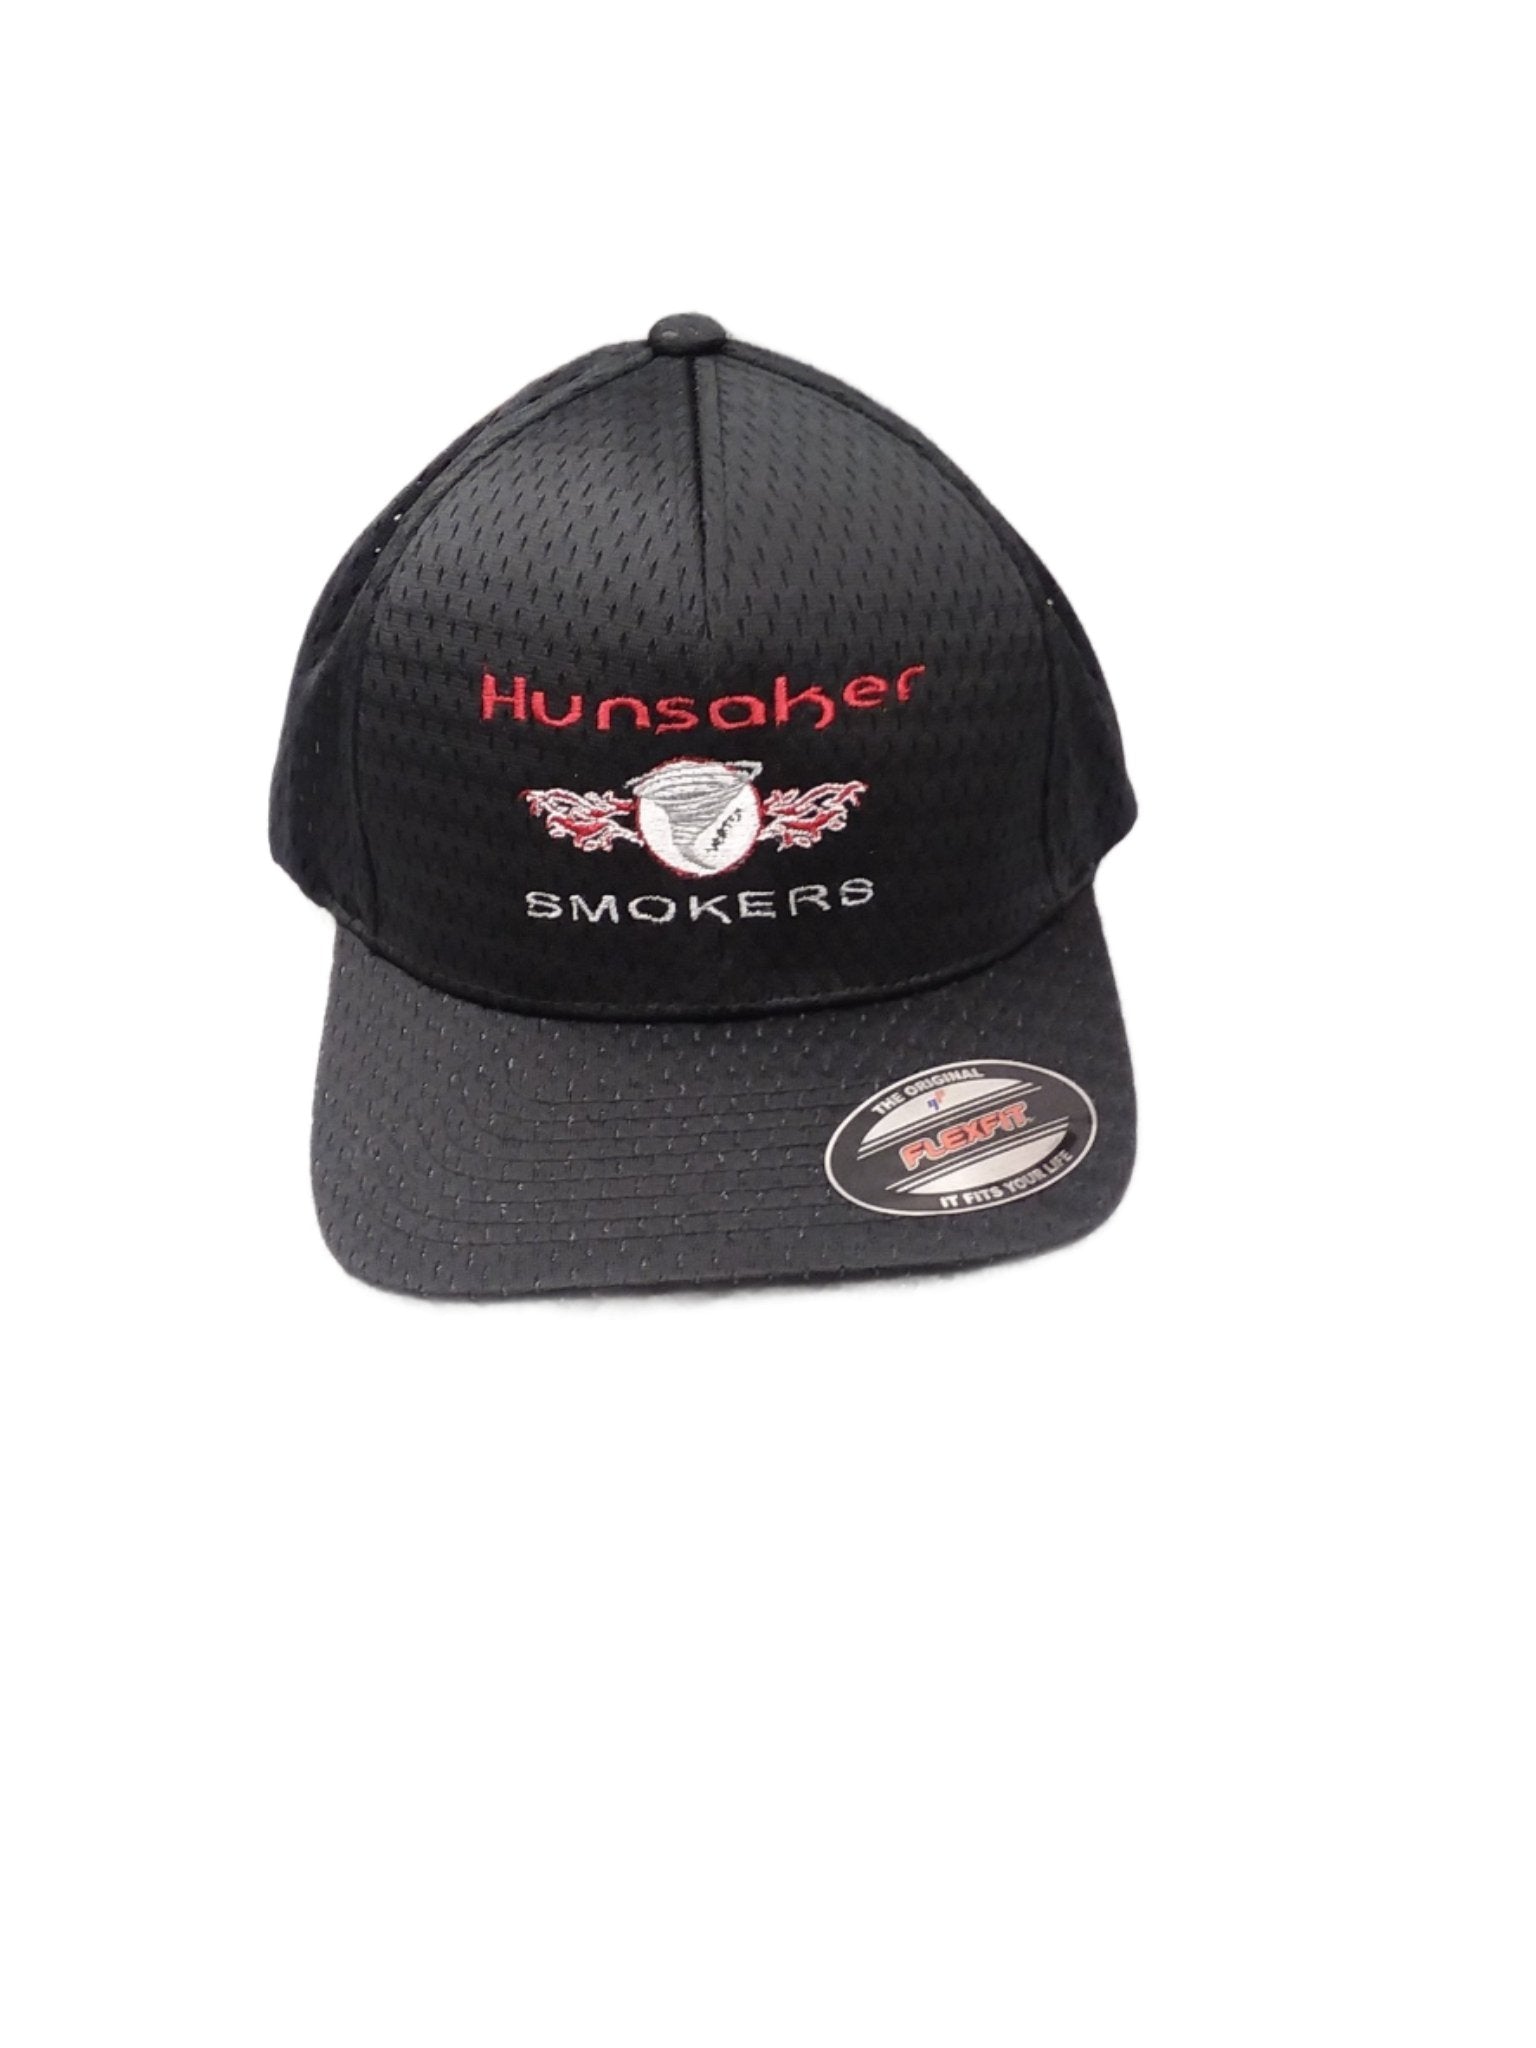 Hunsaker Smokers Universal Fit Hat: Stay Cool and Stylish While Grilling - Hunsaker Vortex Smokers